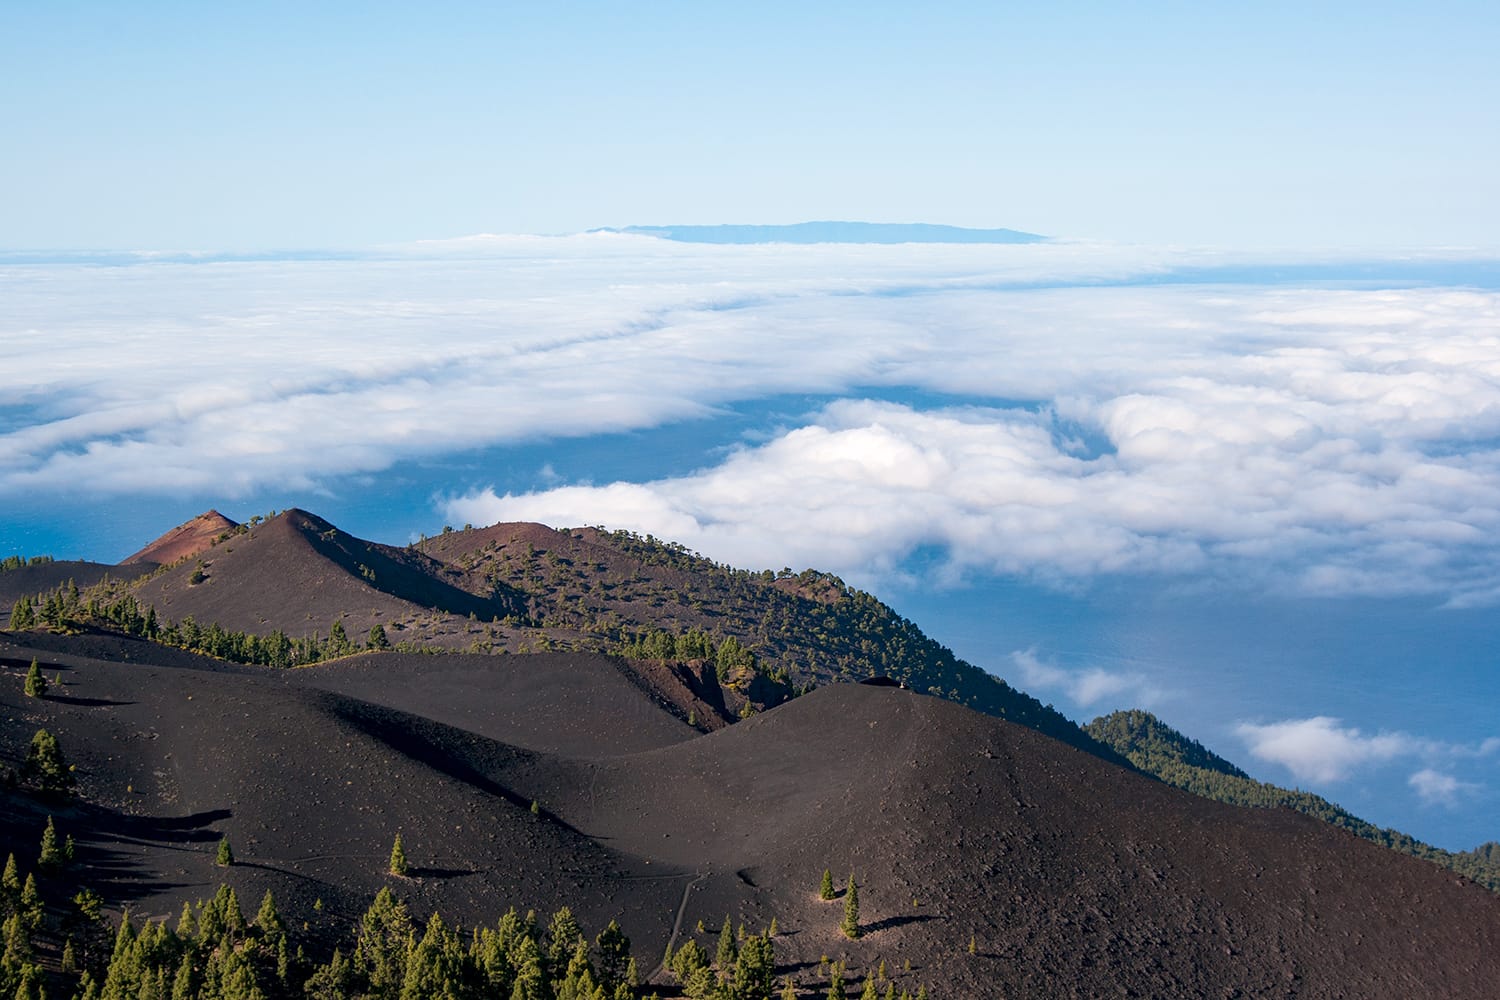 Views of Martin Volcano in Cumbre Vieja Natural Park and El Hierro island on the backround.